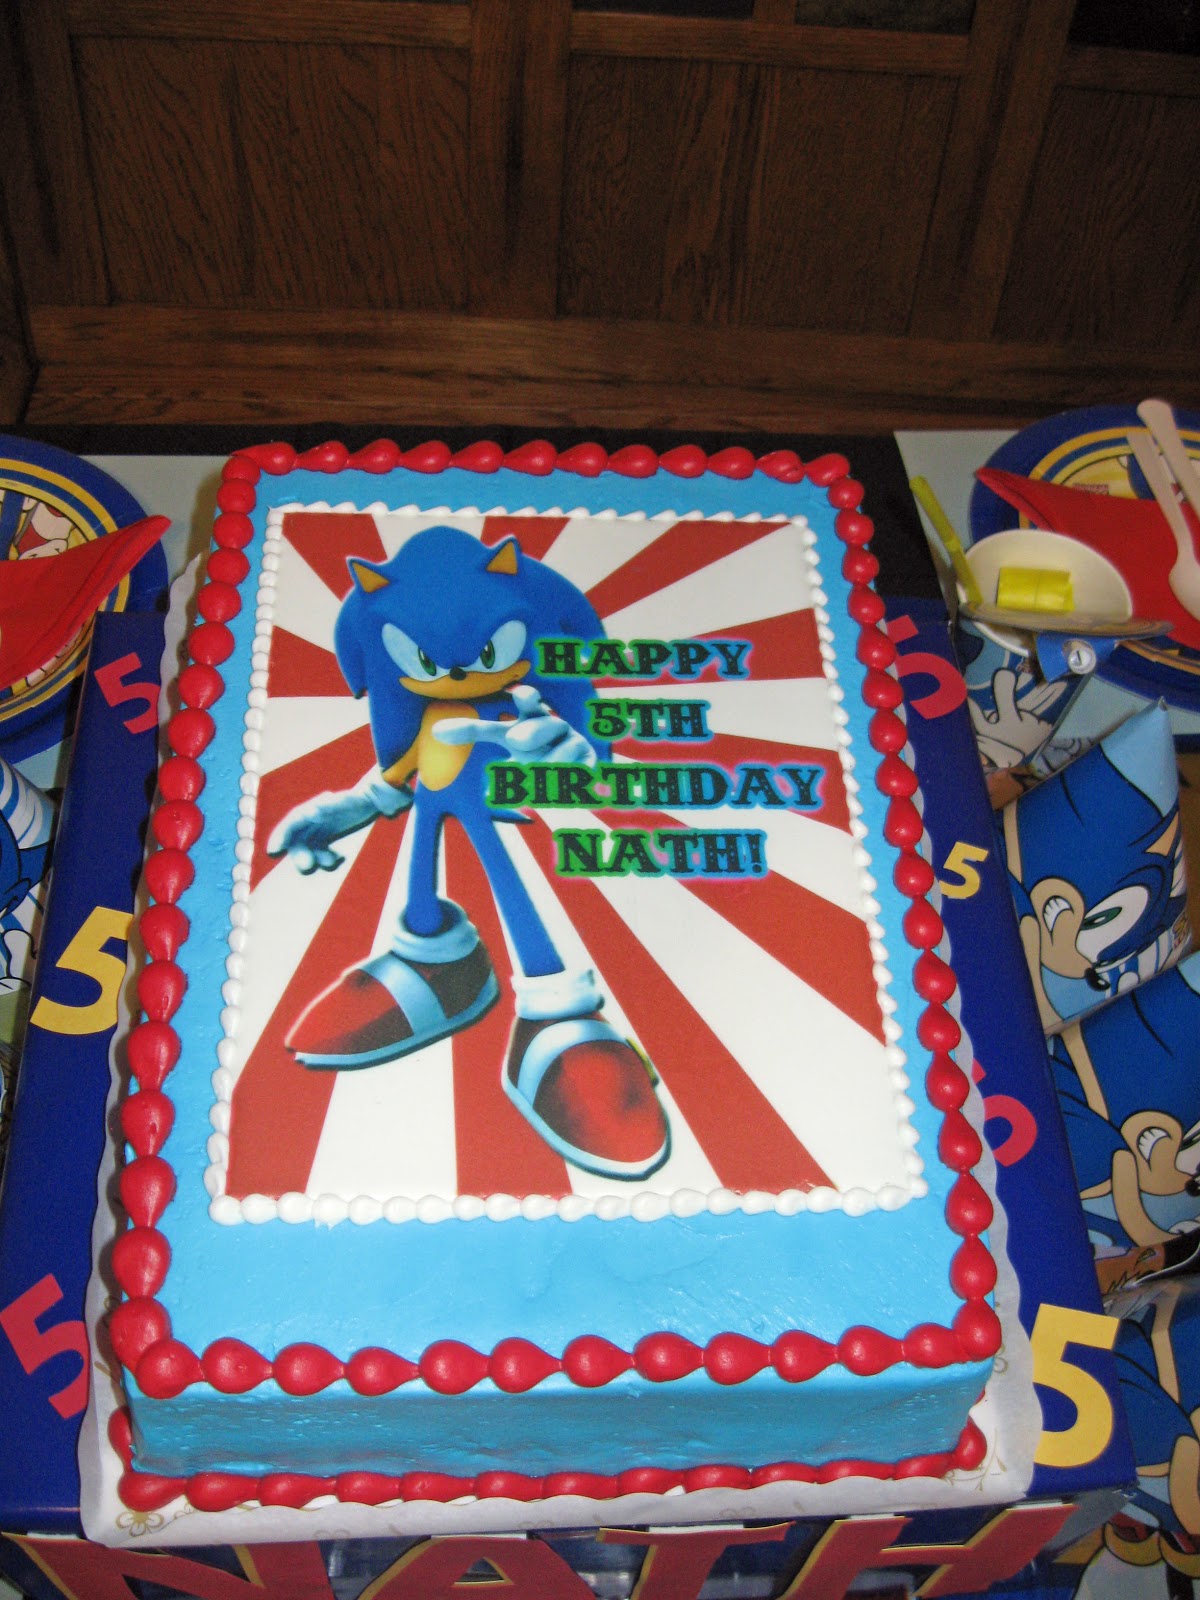 Cheng and 3 Kids: Nath's Sonic the Hedgehog Themed 5th Birthday